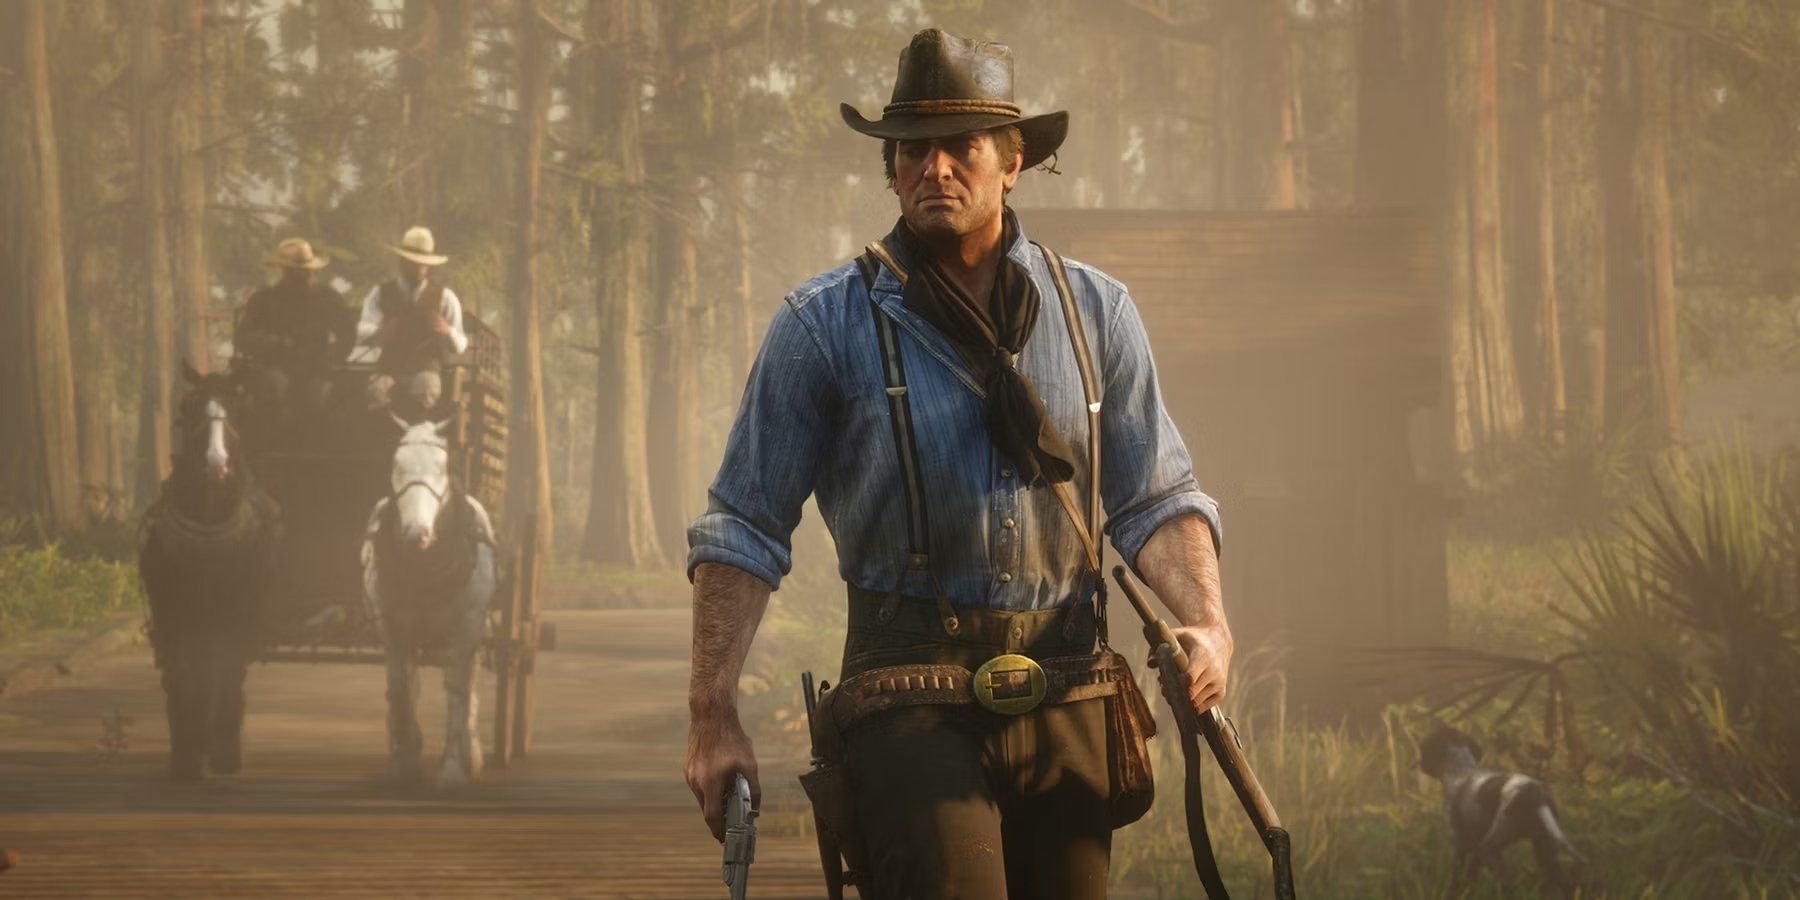 Gruesome Red Dead Redemption 2 Glitch Shows The Toughest NPC Ever